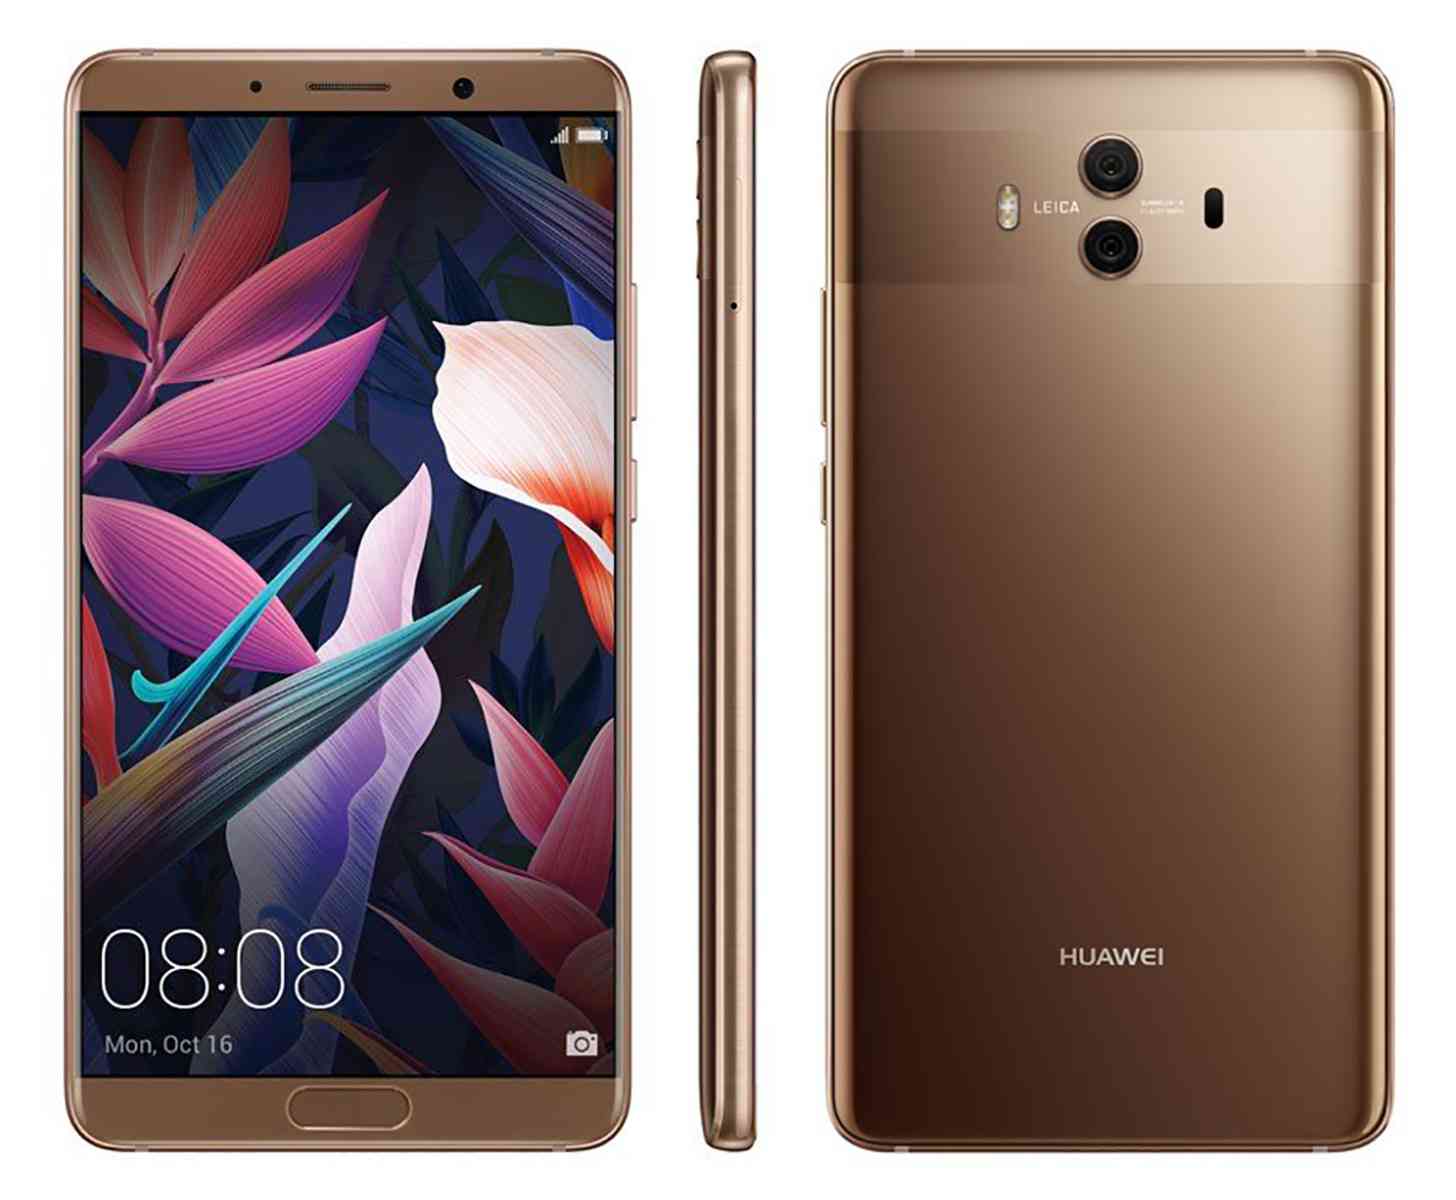 Huawei Mate 10 Mocha color official